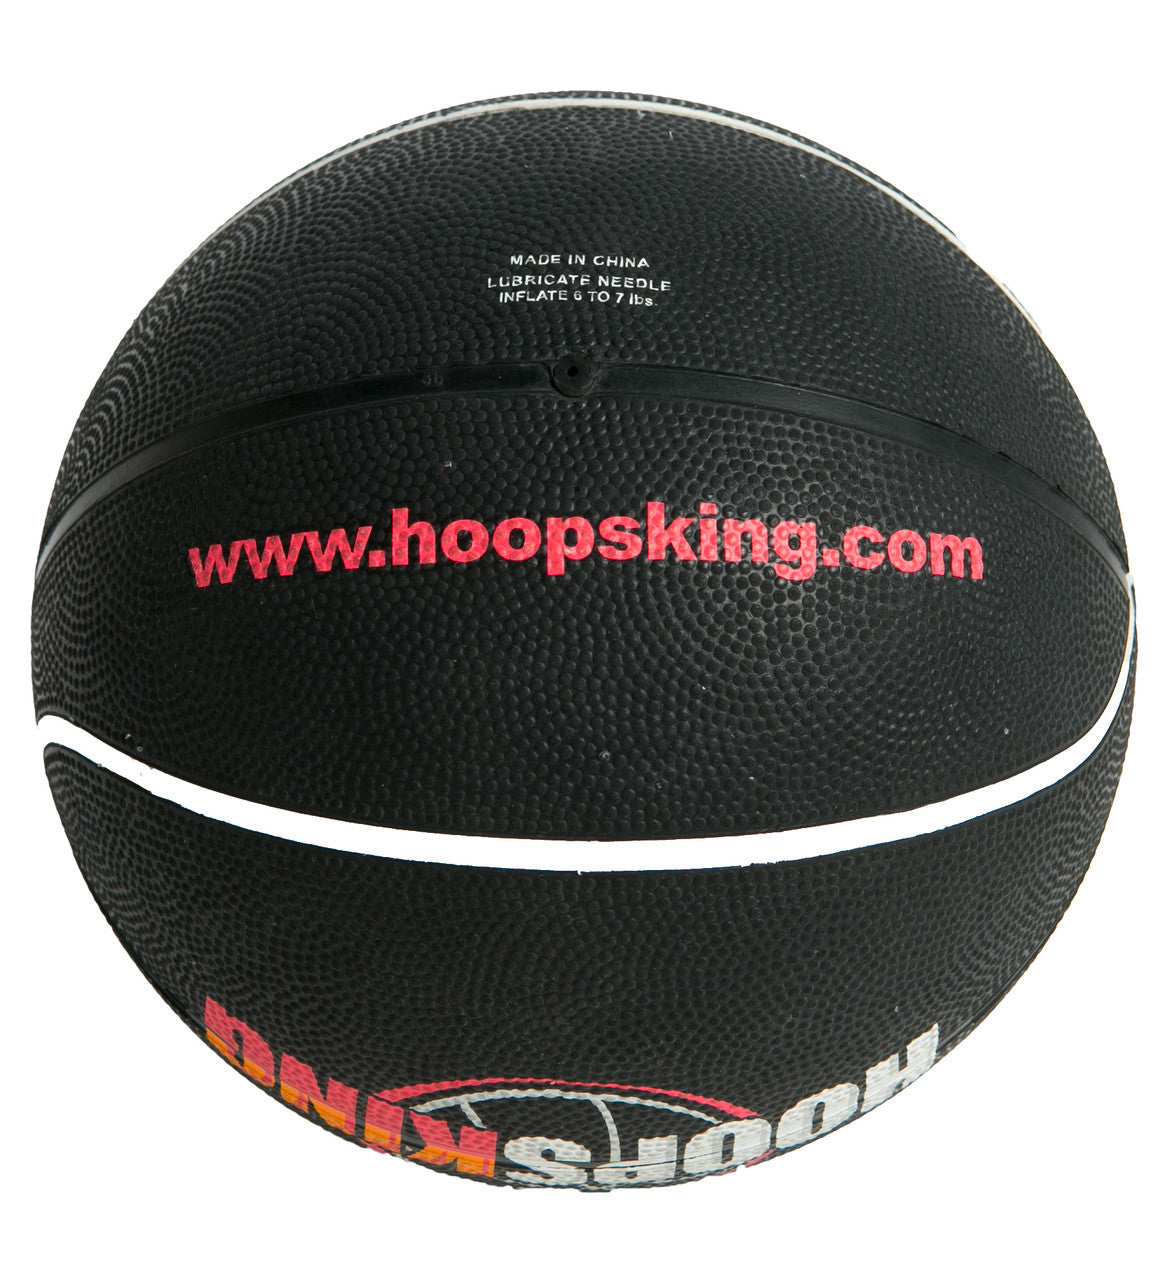 weighted basketball for dribbling